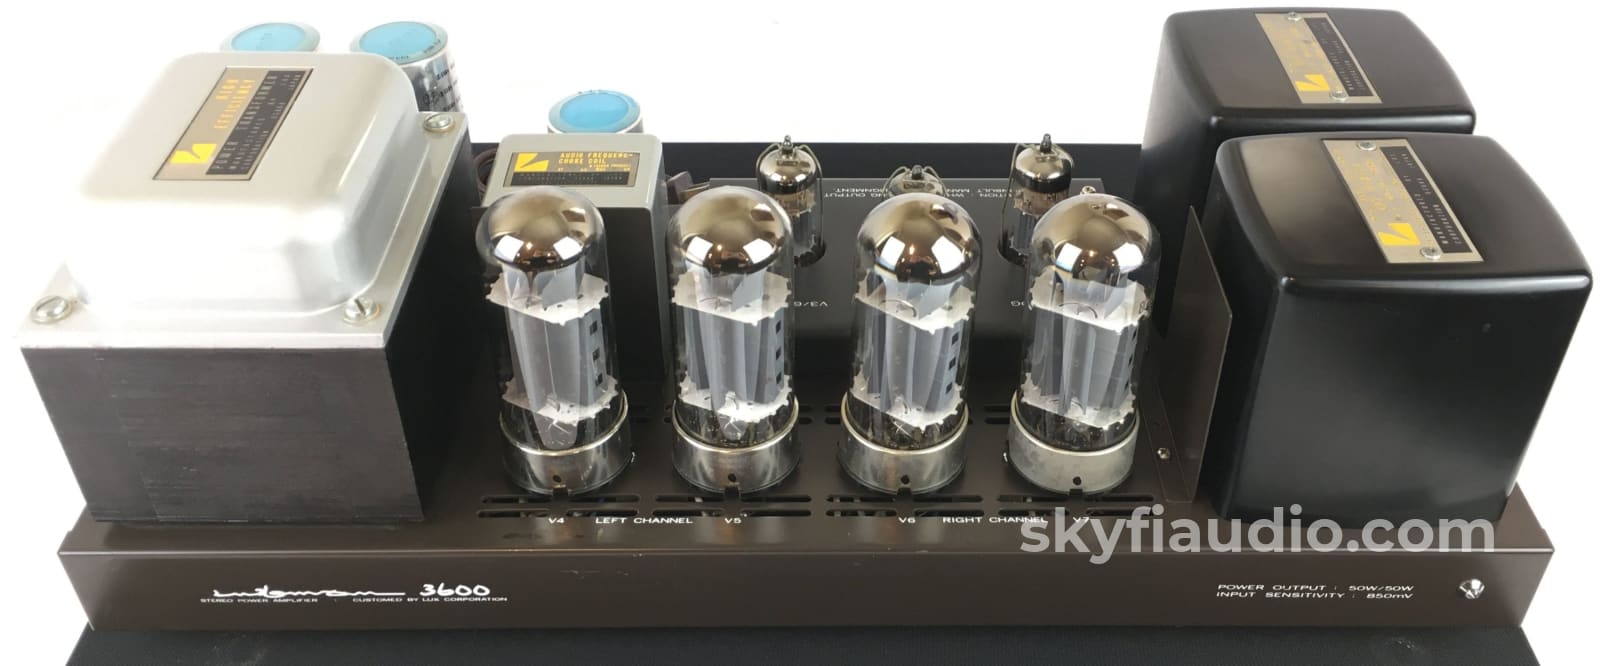 Luxman Mq-3600 Stereo Tube Amplifier With Original Tubes